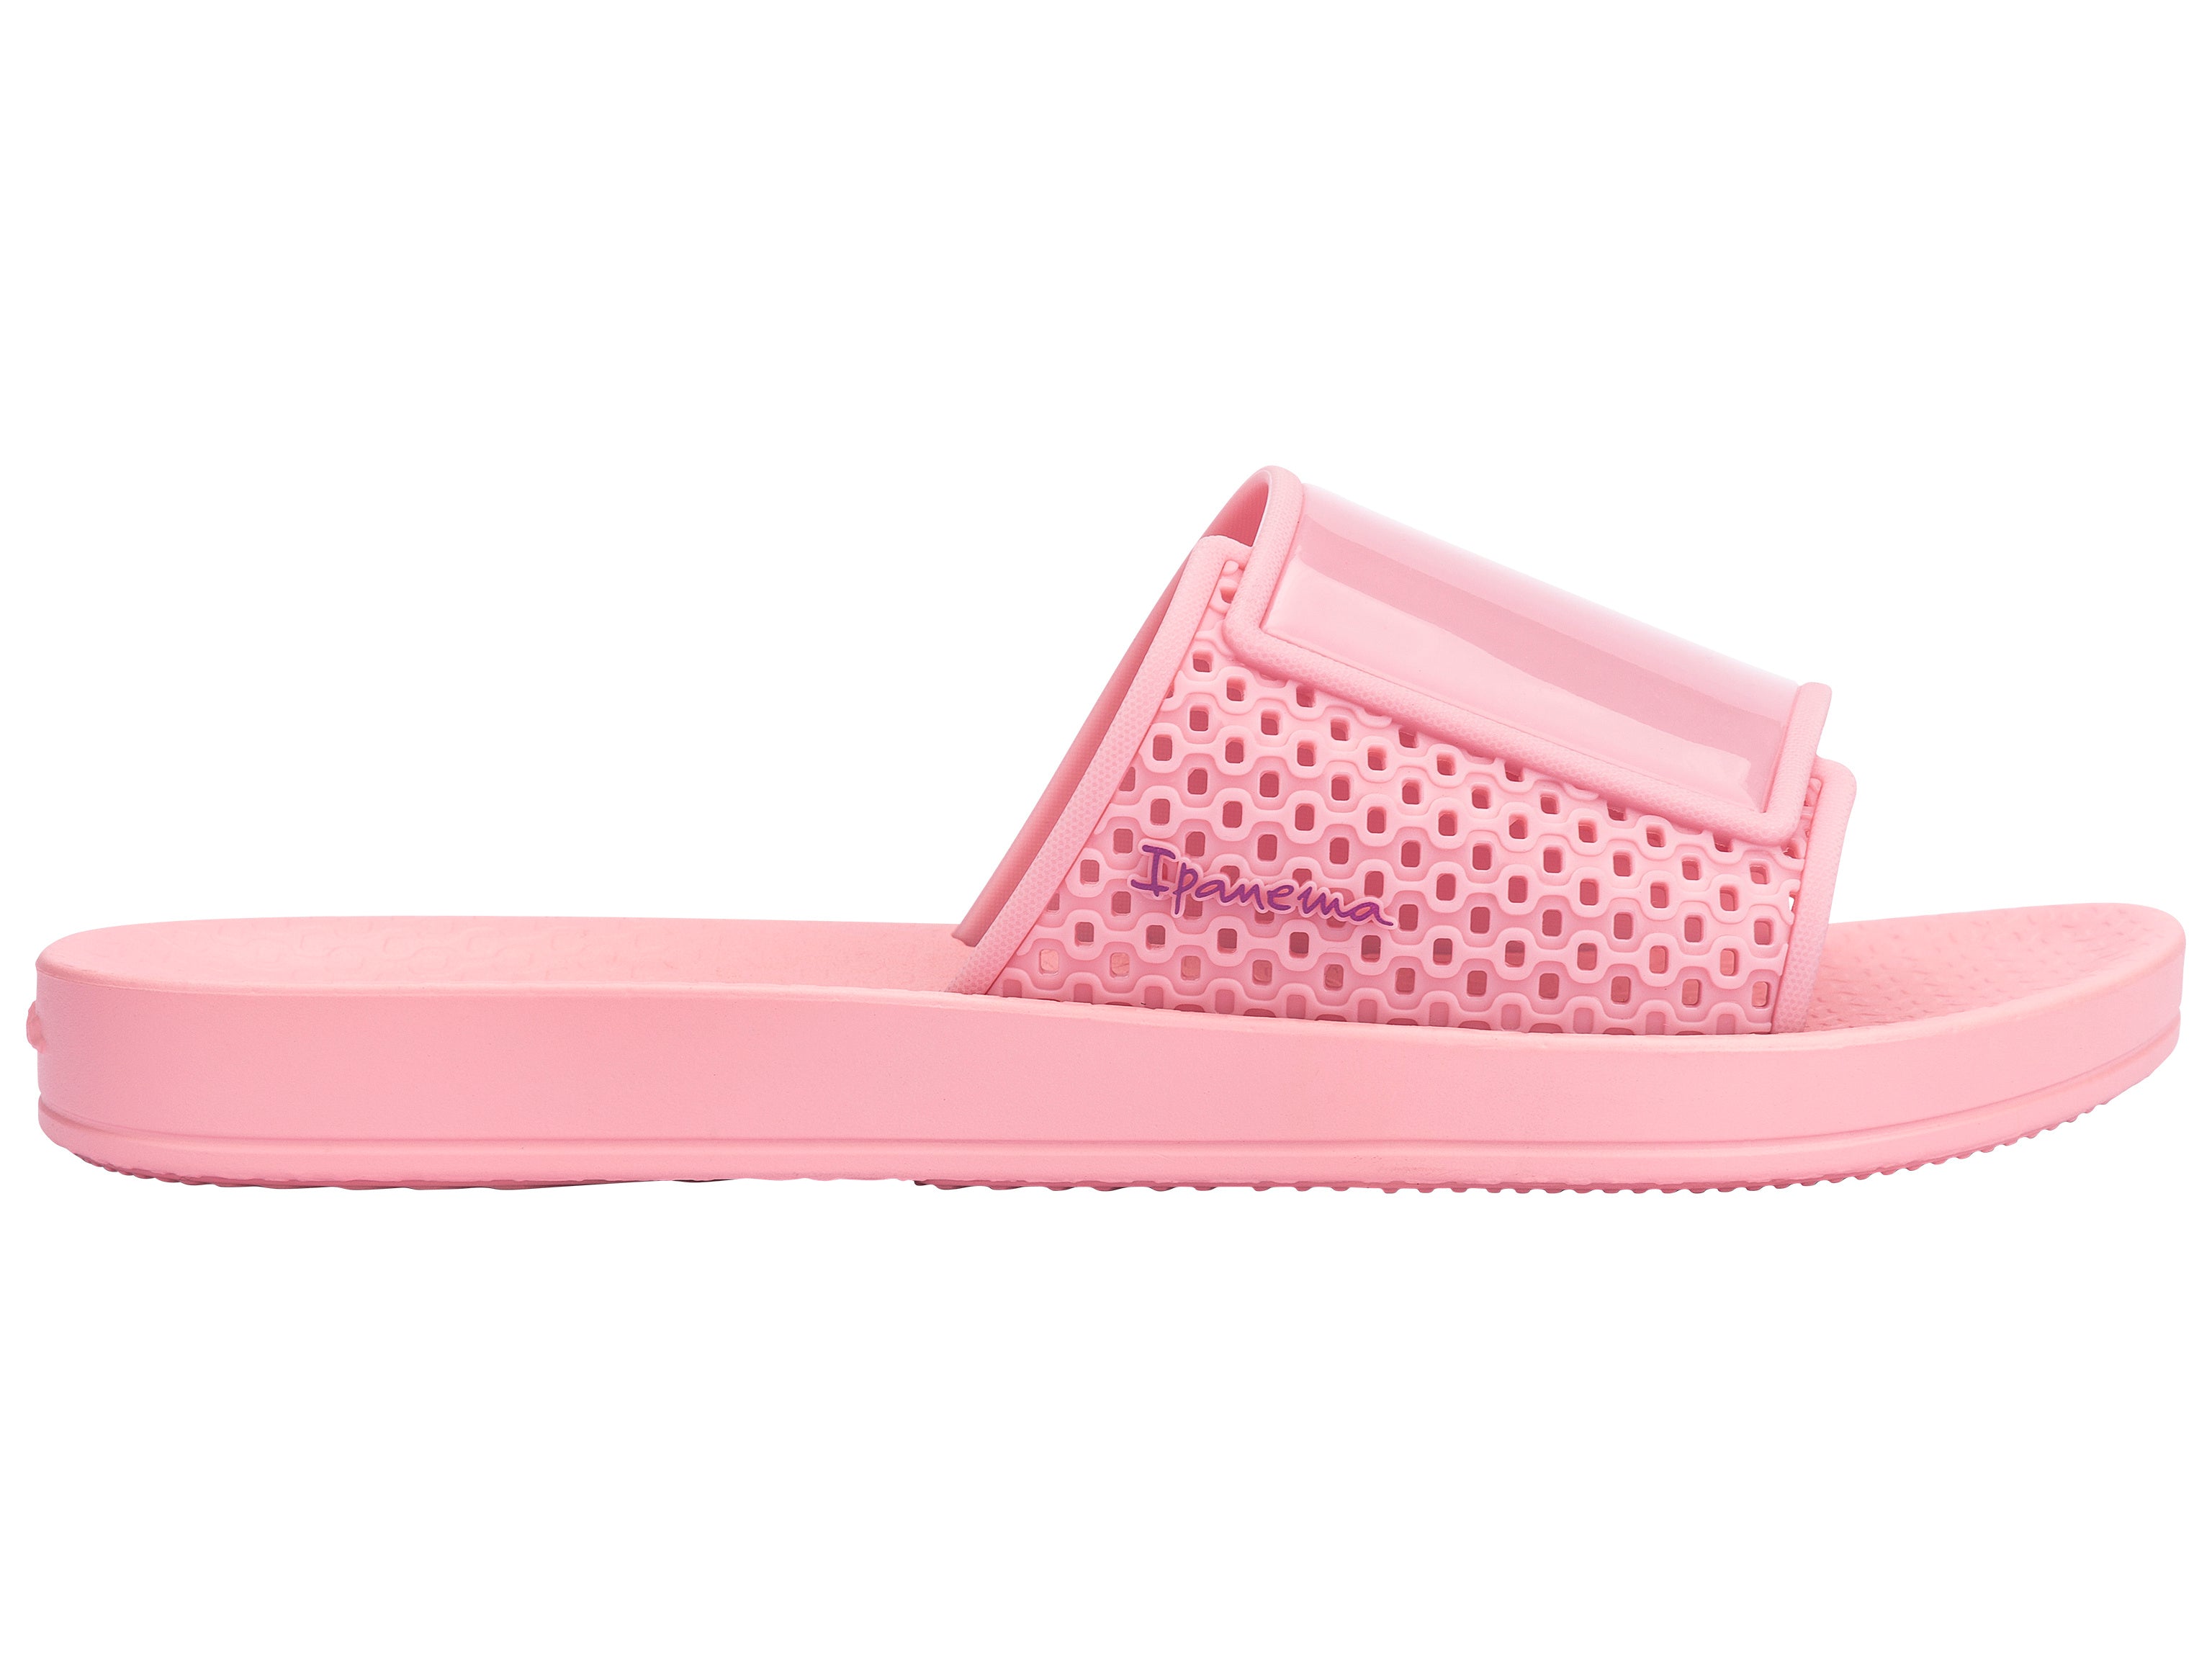 Outer side view of a pink Ipanema Ana Urban women's slide.